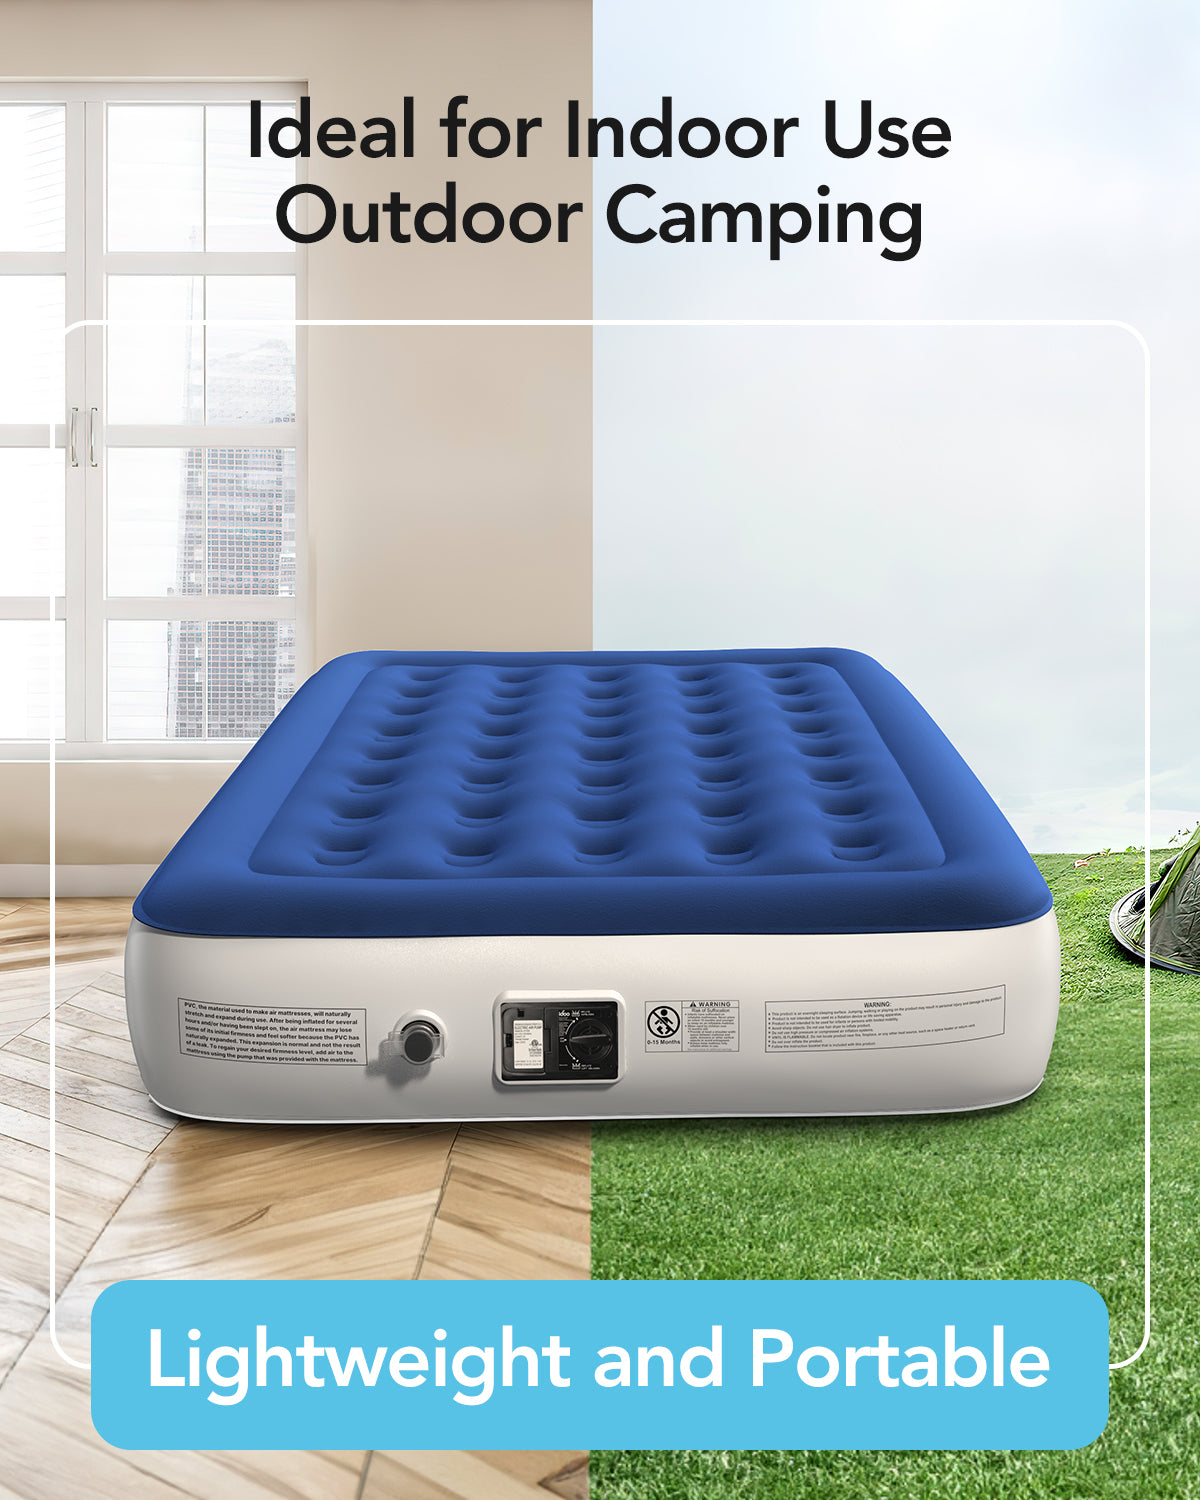 iDOO Queen Size Air Mattress, Inflatable Airbed with Built-in Pump - Air Bed by iDOO